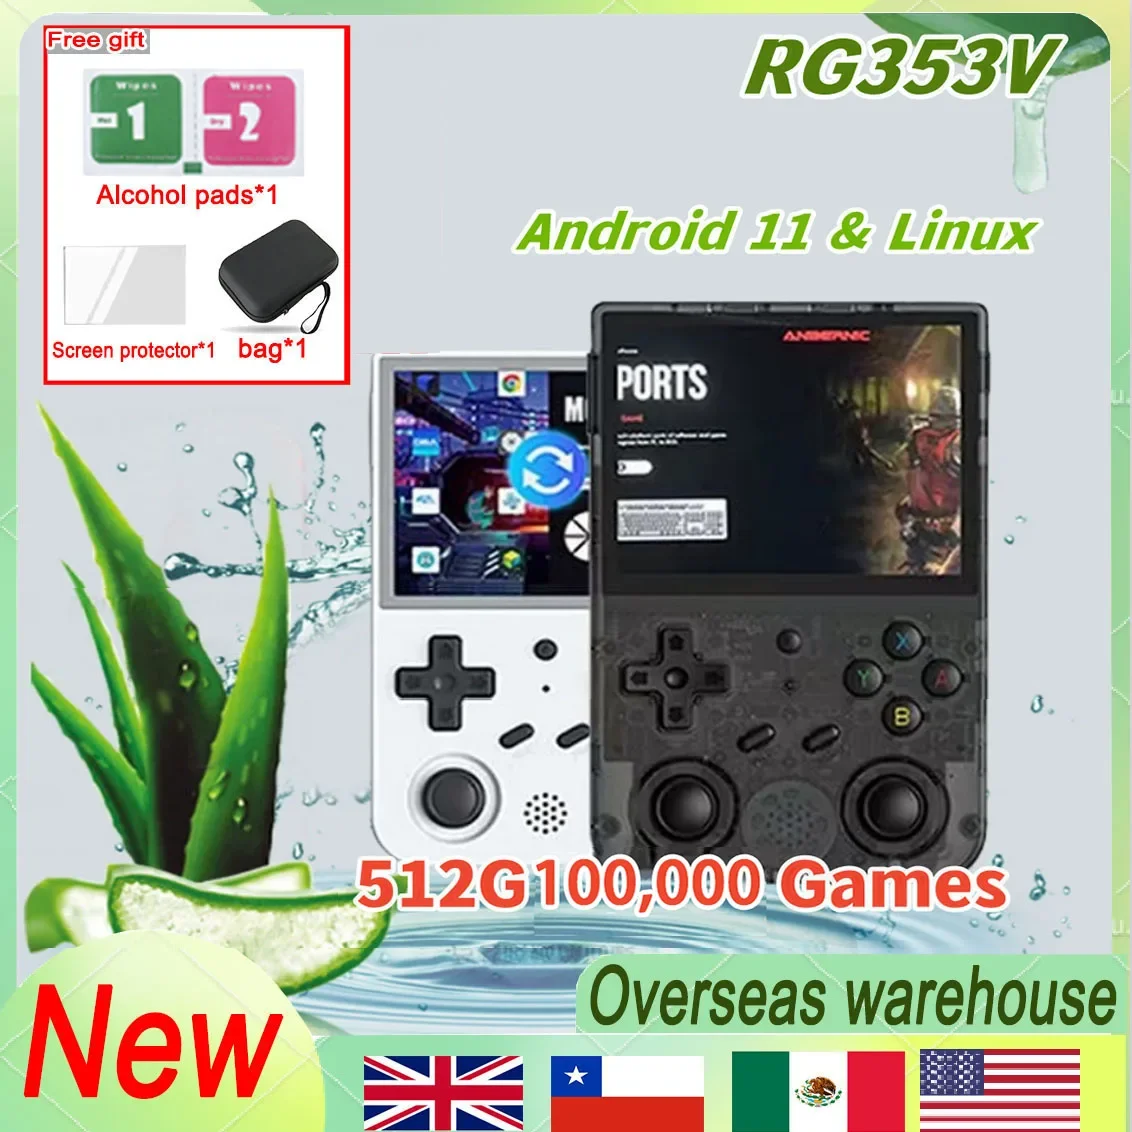 

RG353V ANBERNIC Android 11 Linux OS 3.5 INCH 640*480 Retro Handheld Game Console 512G 80000 Game Handle HD Built-in 20 Simulator